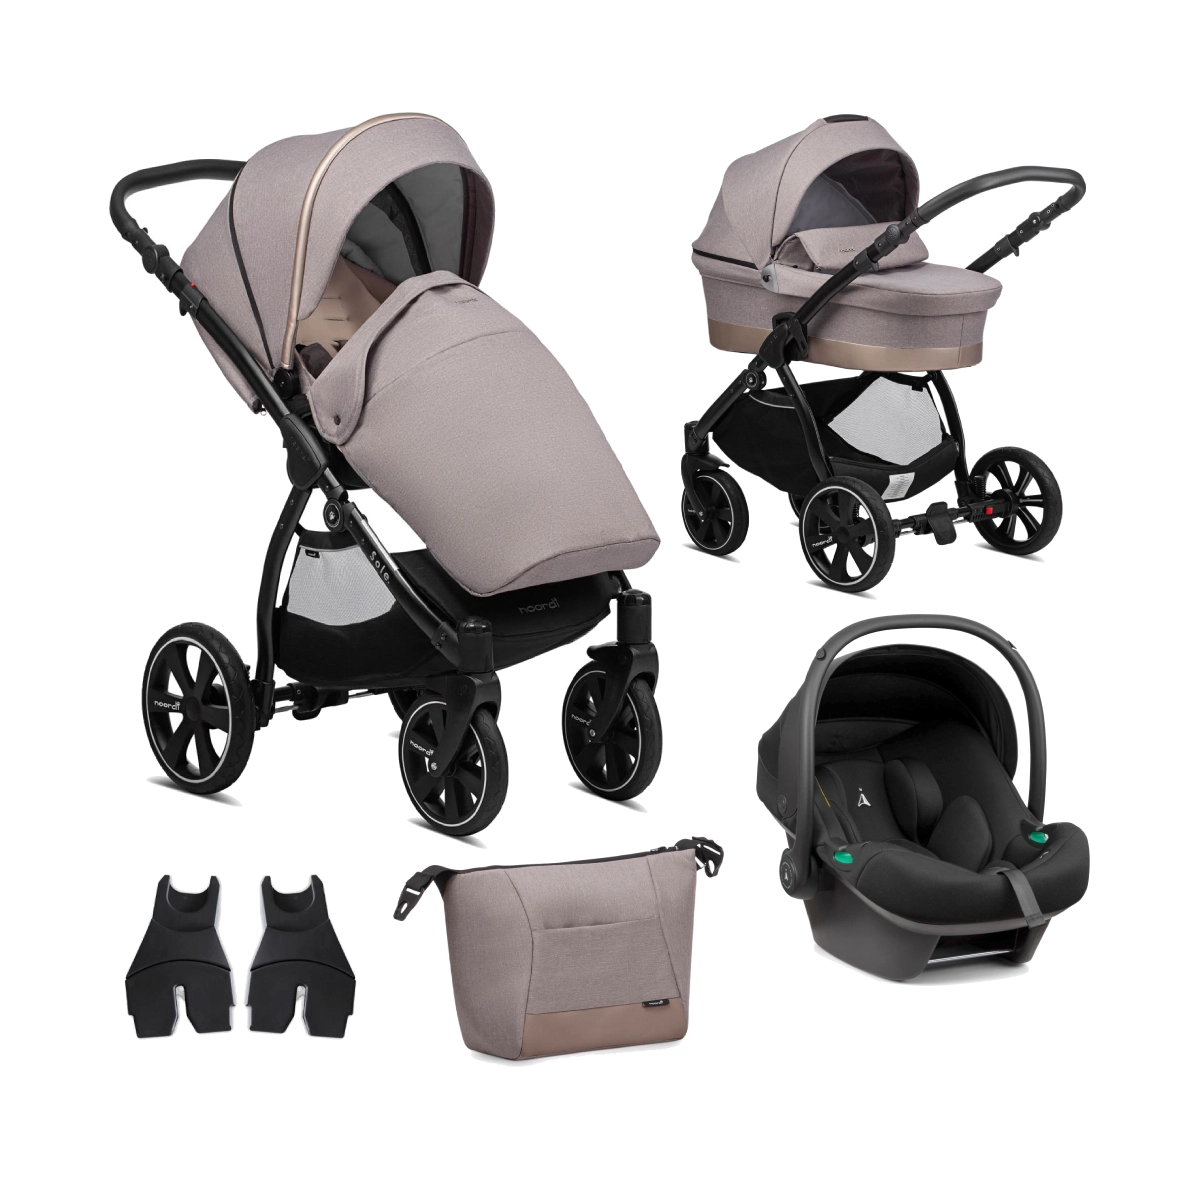 Noordi Sole Go 3in1 Travel System with Terra i-Size Car Seat